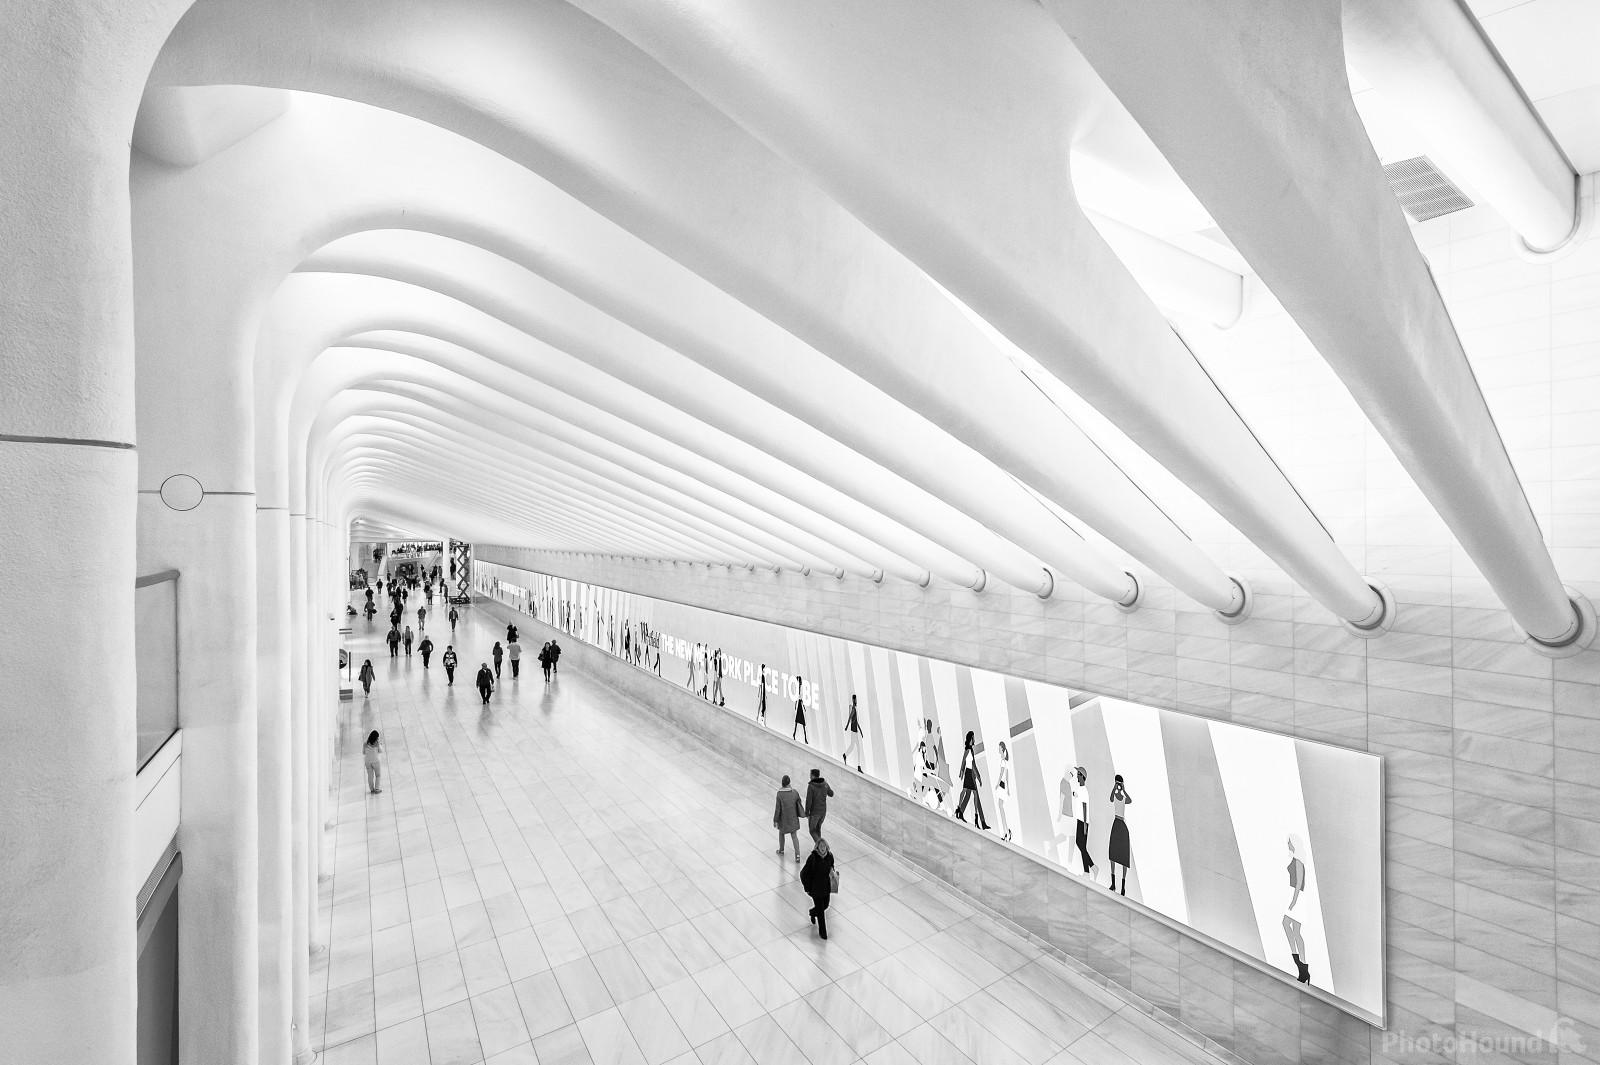 Image of Passages to WTC Transportation Hub (Oculus) by VOJTa Herout